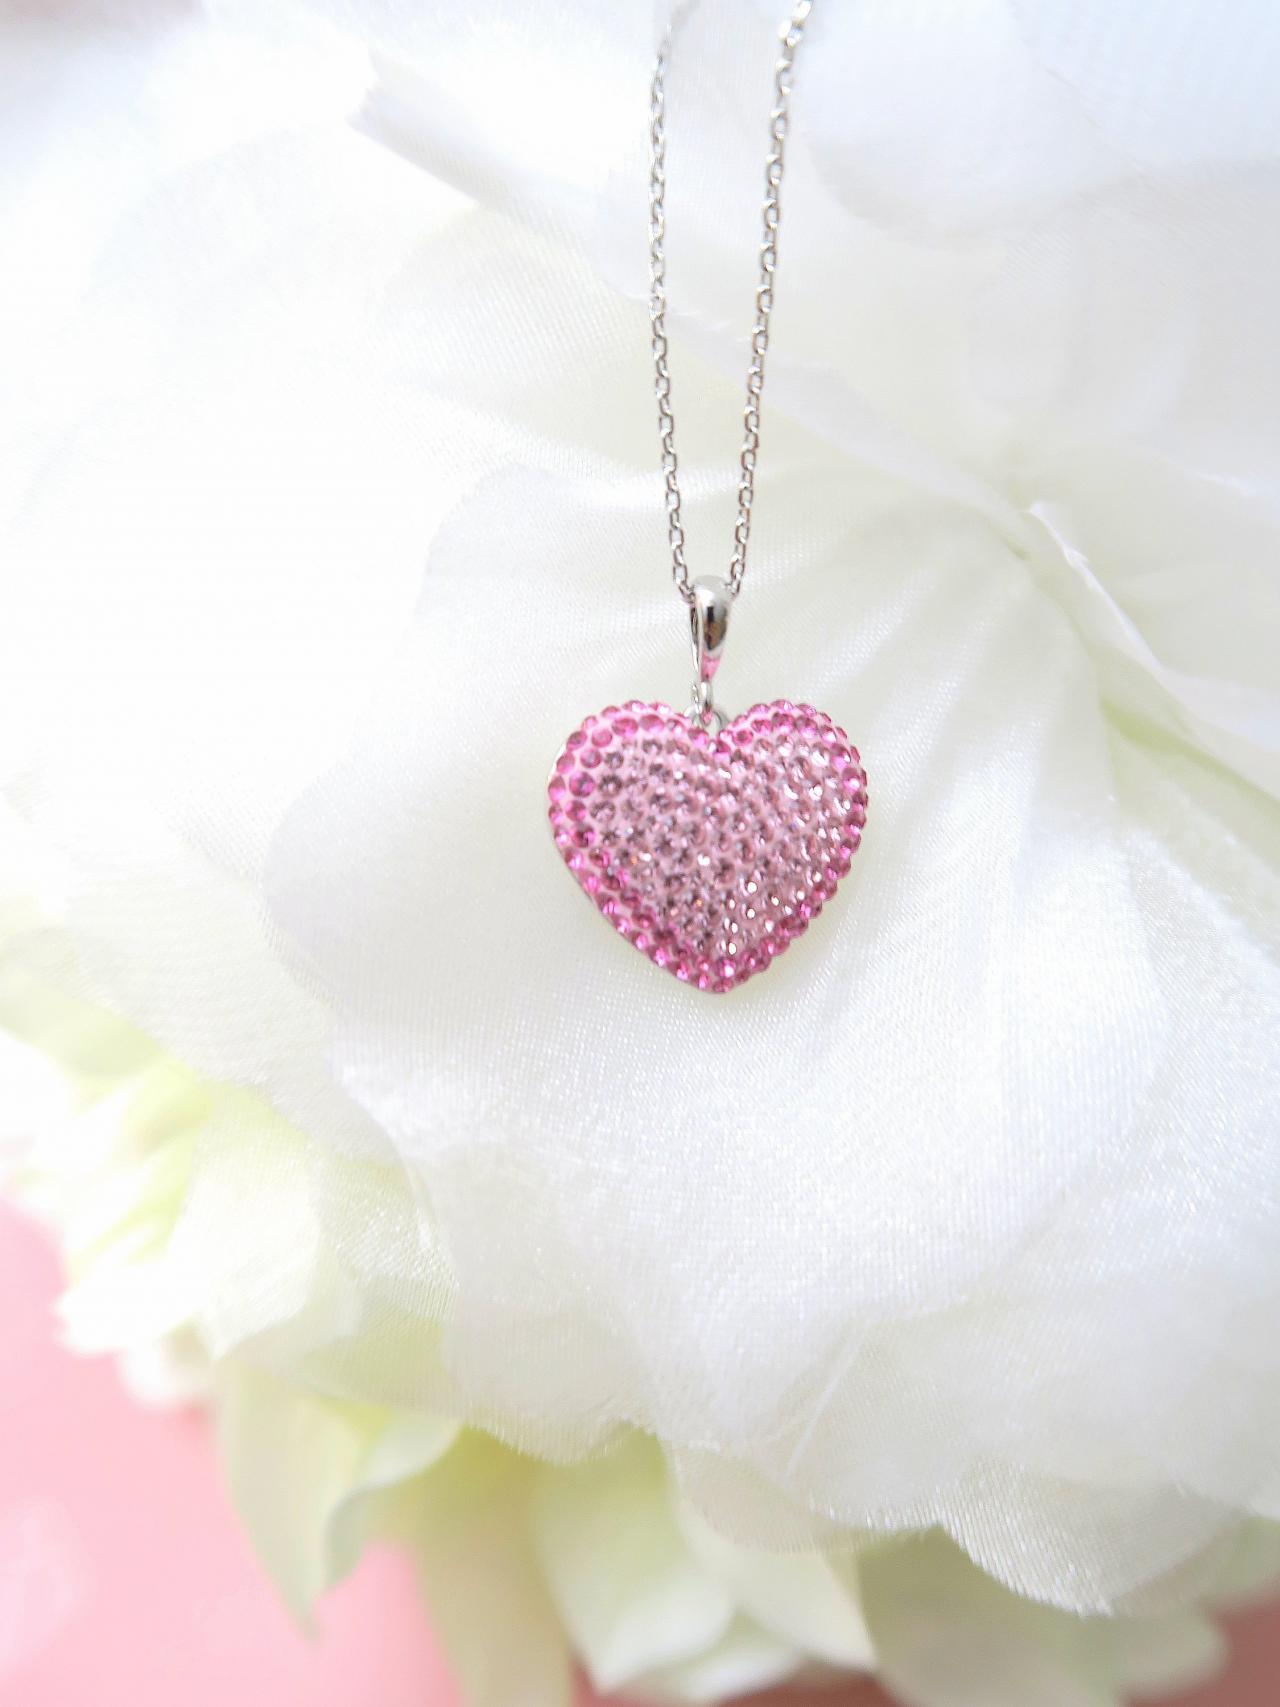 Pink Heart Crystal Charm Necklace Swarovski BeCharmed Pave Heart Crystal Valentine's Day Gift Birthday Gift Mother's Day Gift (N042)